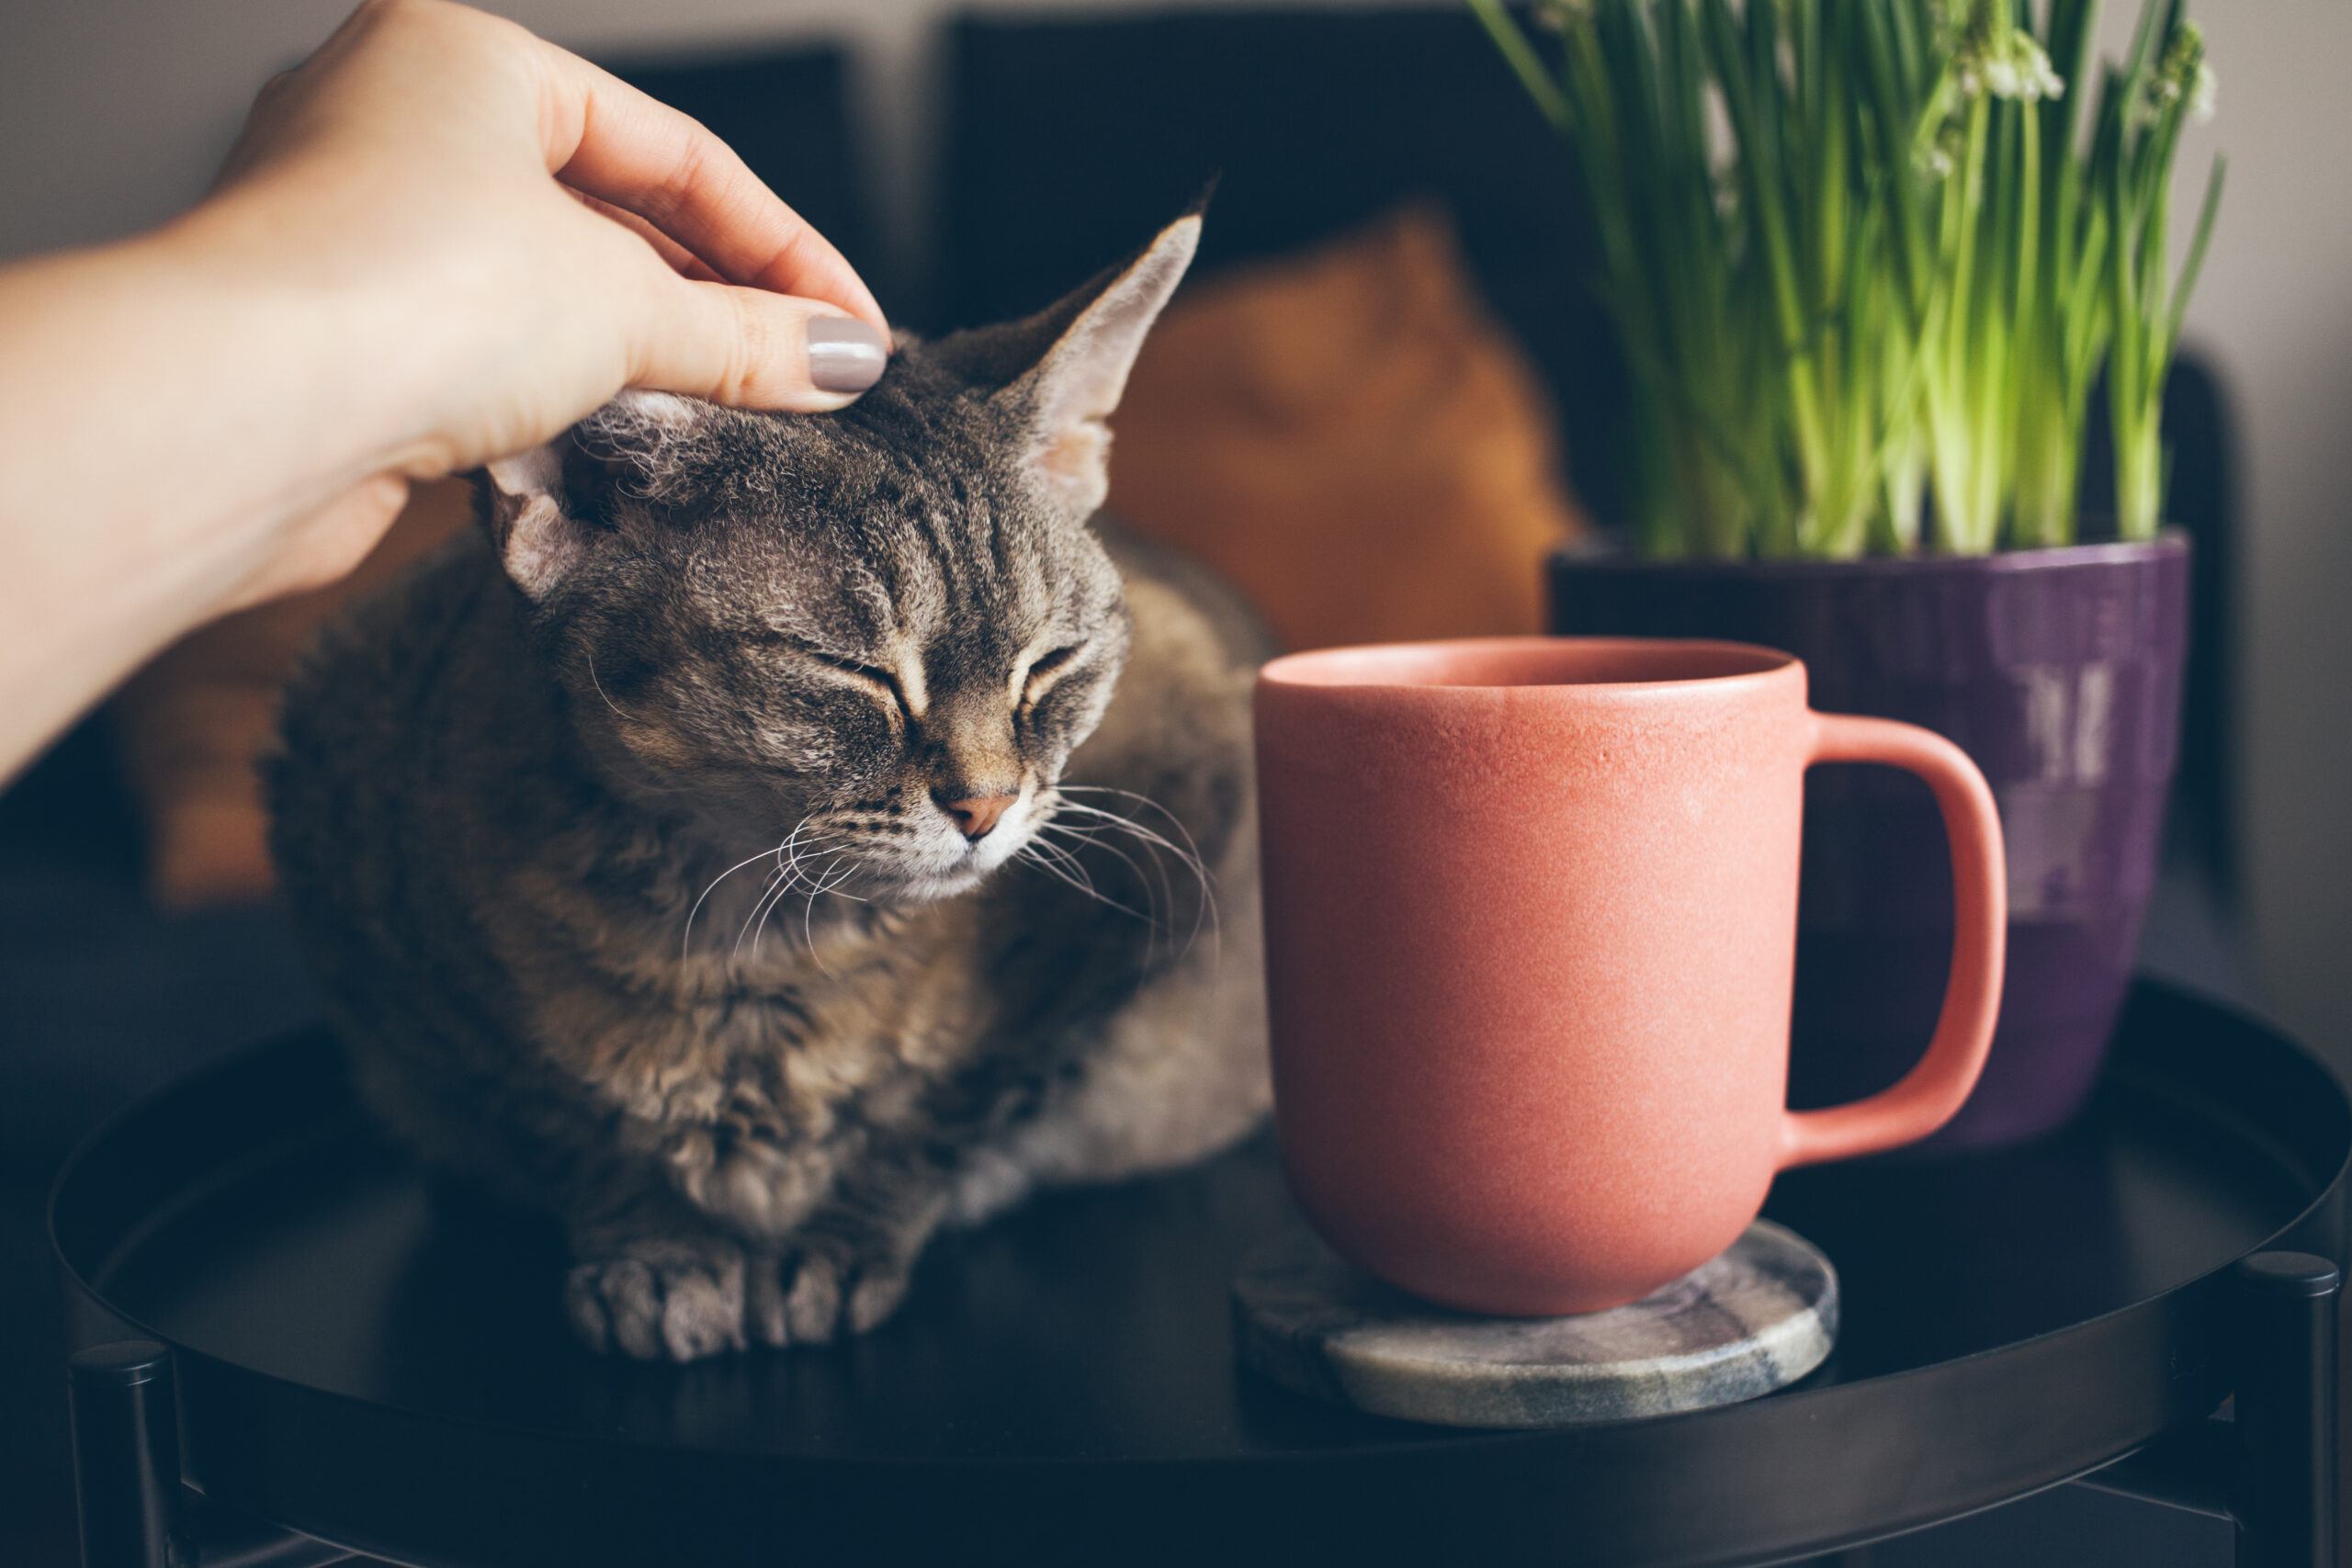 Hand petting a cat next to a red mug full of tea, to destress and reduce cortisol levels